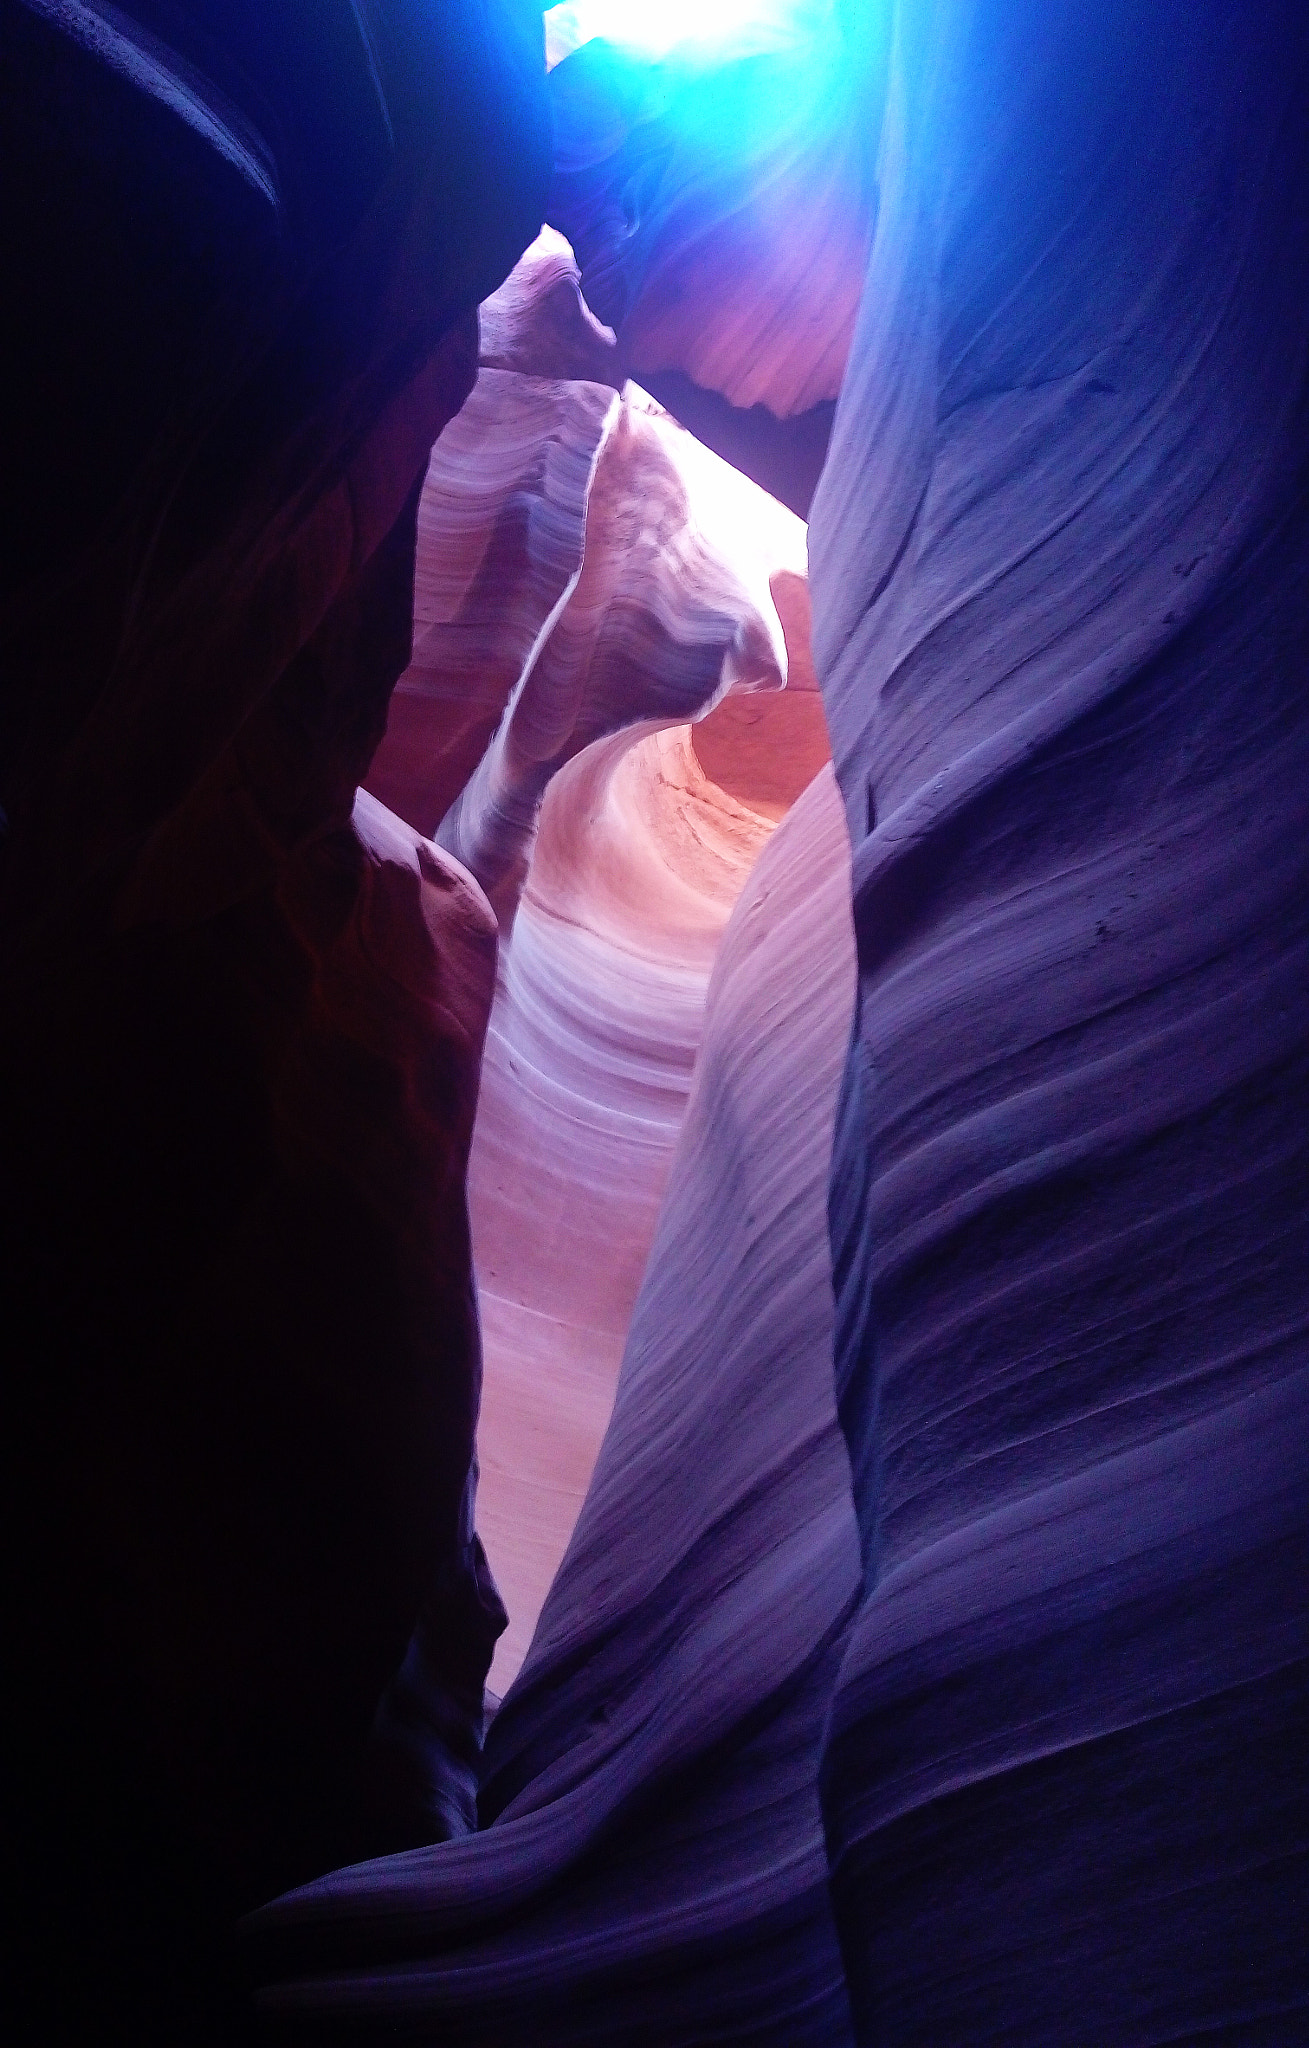 HTC ONE M9+ sample photo. Antelope canyon photography